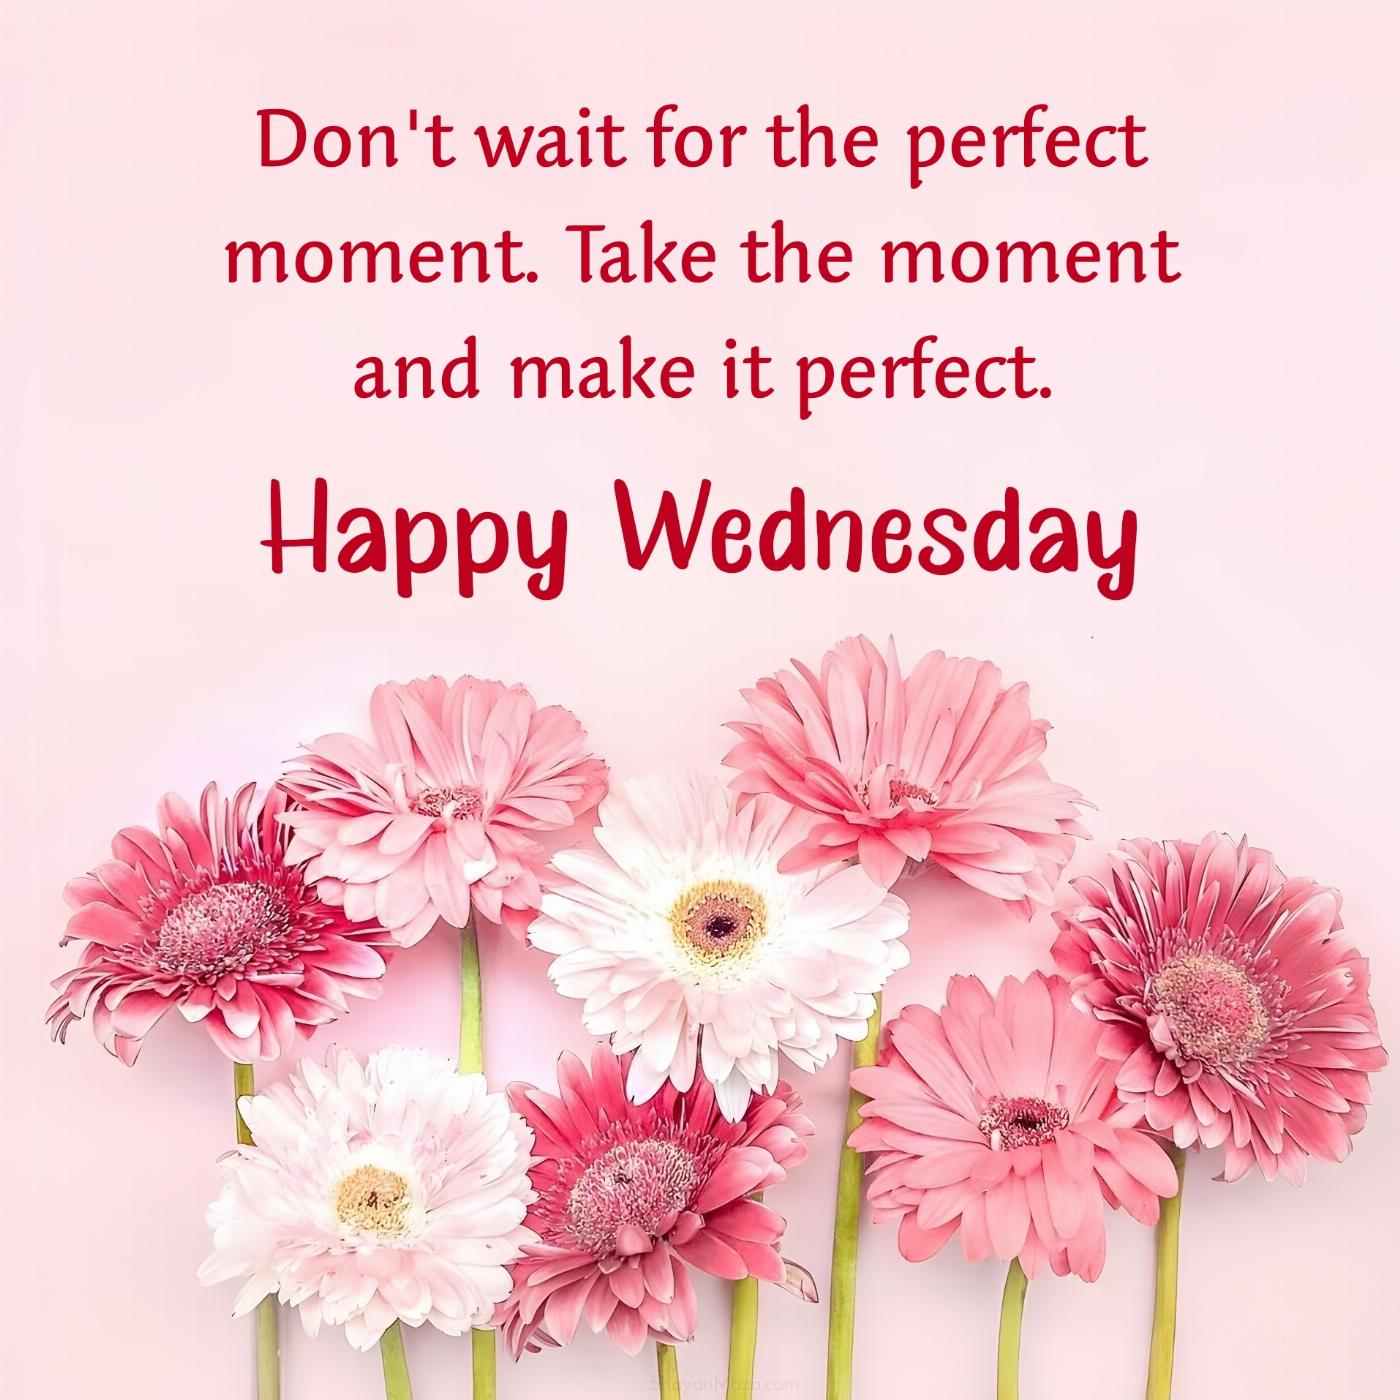 Happy Wednesday! Don't wait for the perfect moment